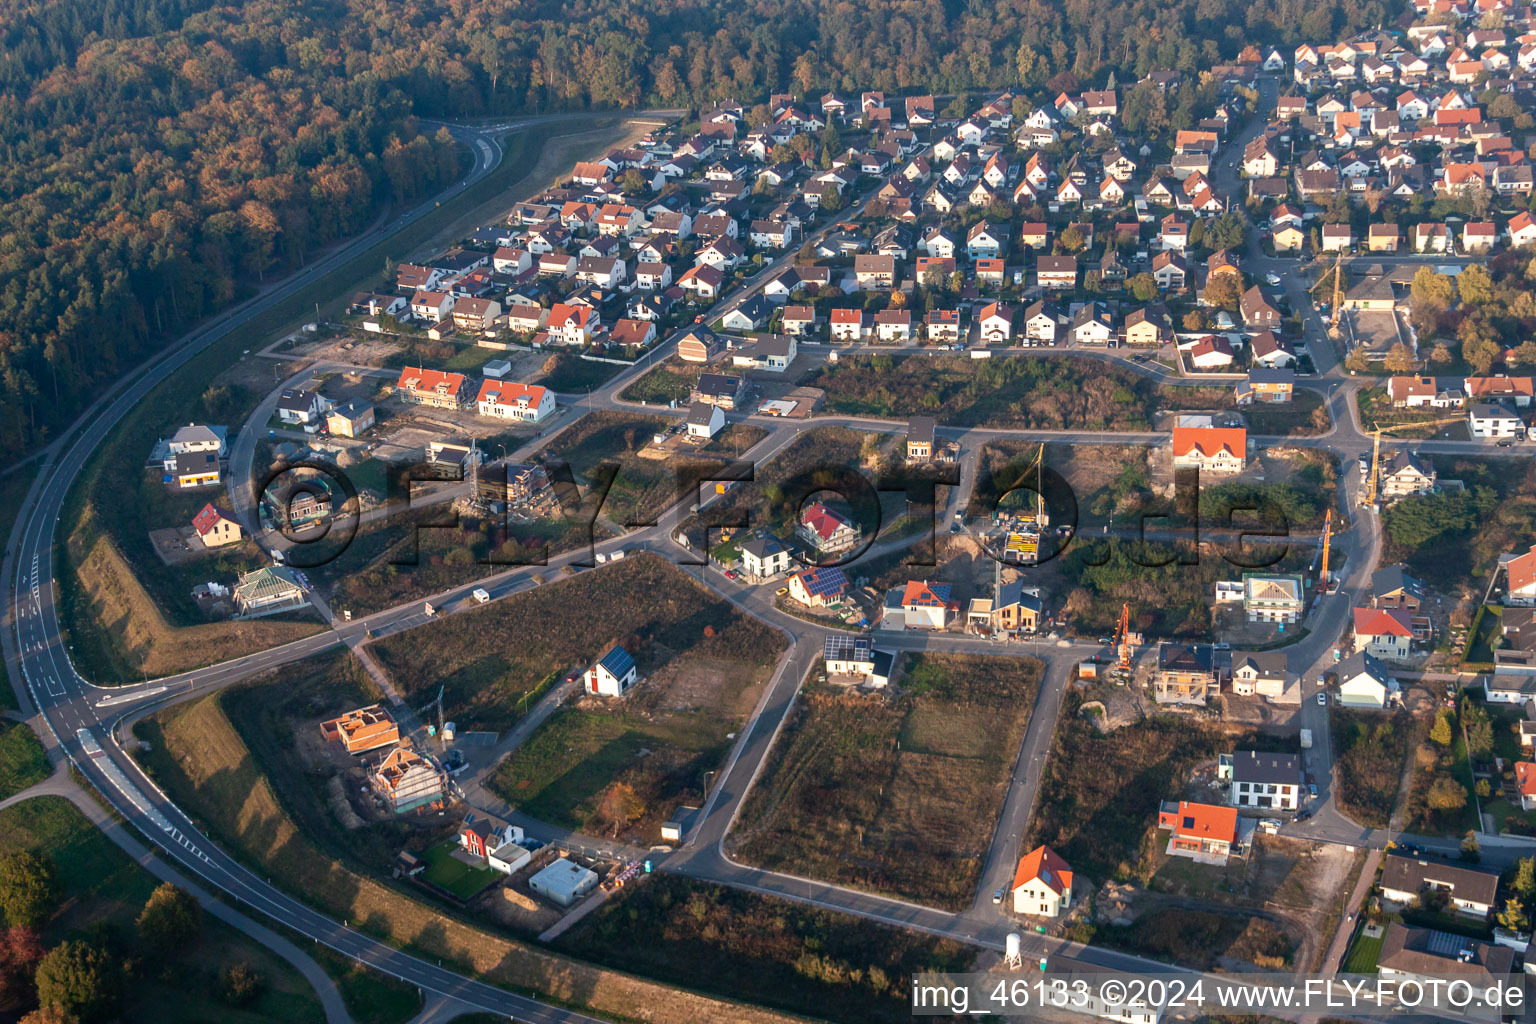 Forstlandallee in Jockgrim in the state Rhineland-Palatinate, Germany from above